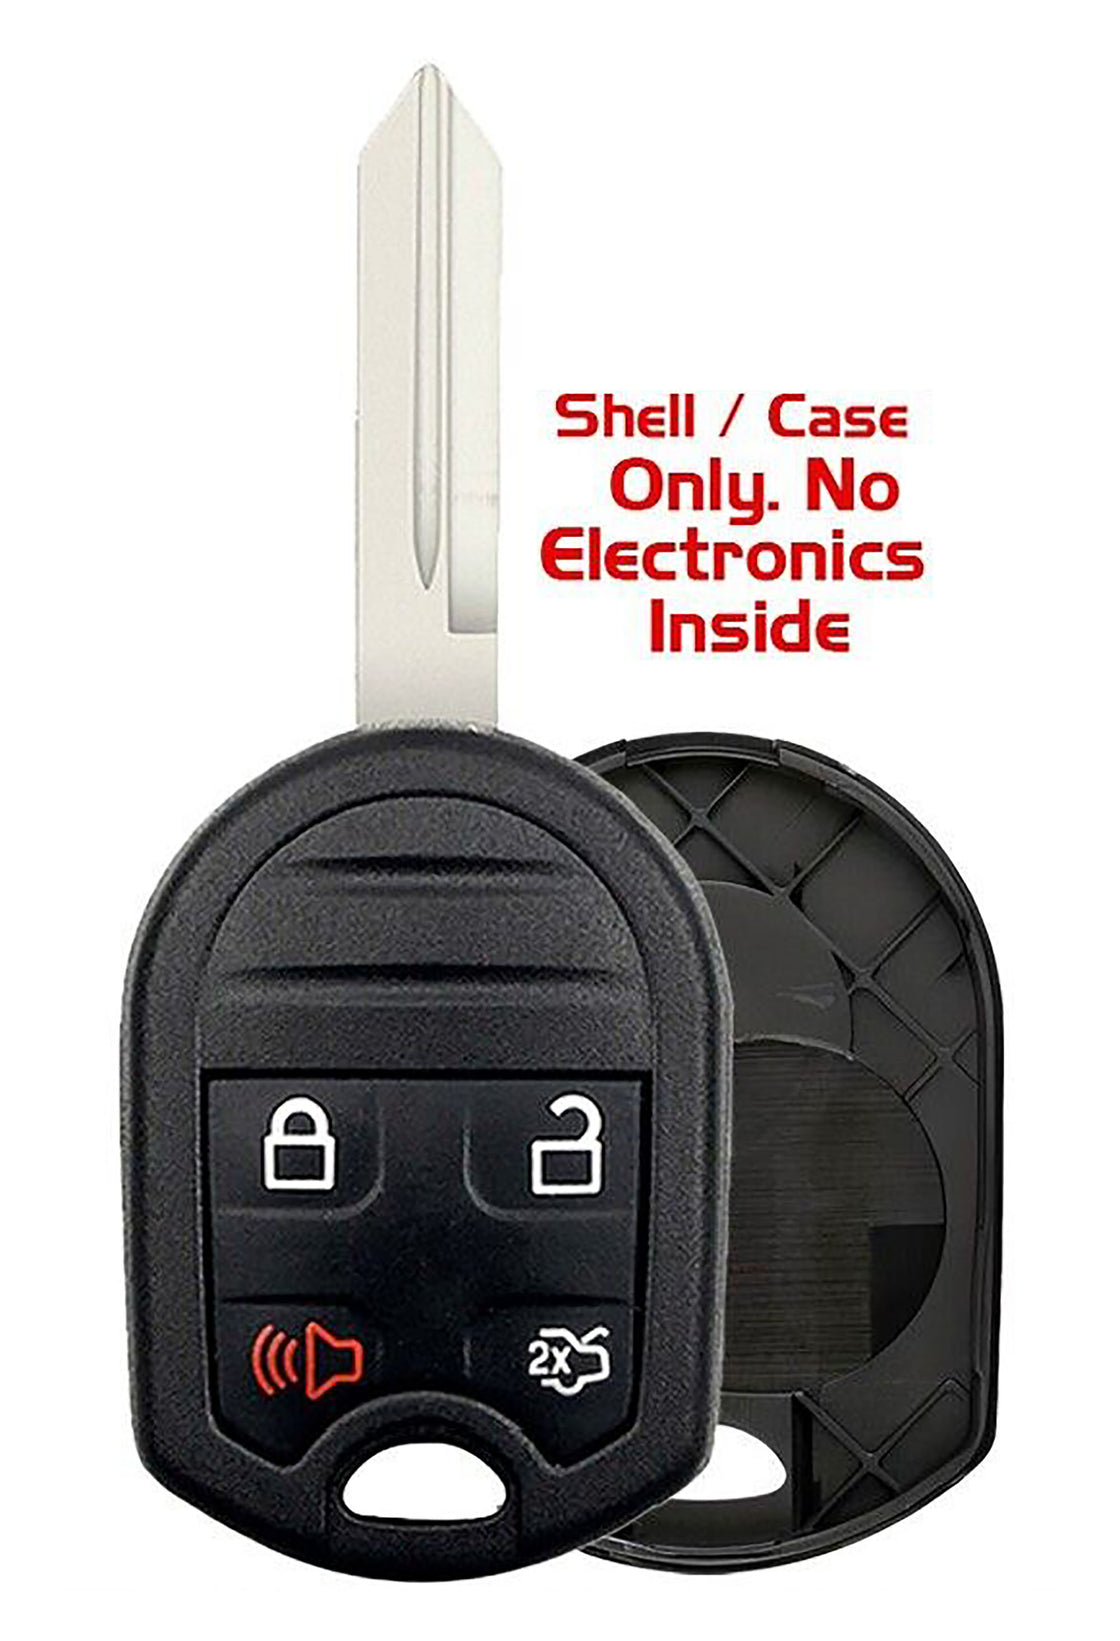 1x New Replacement SHELL / CASE Remote Key Fob Compatible with & Fit For Ford Mazda Lincoln Mercury - MPN CWTWB1U793-FL-12 (NO electronics or Chip inside)